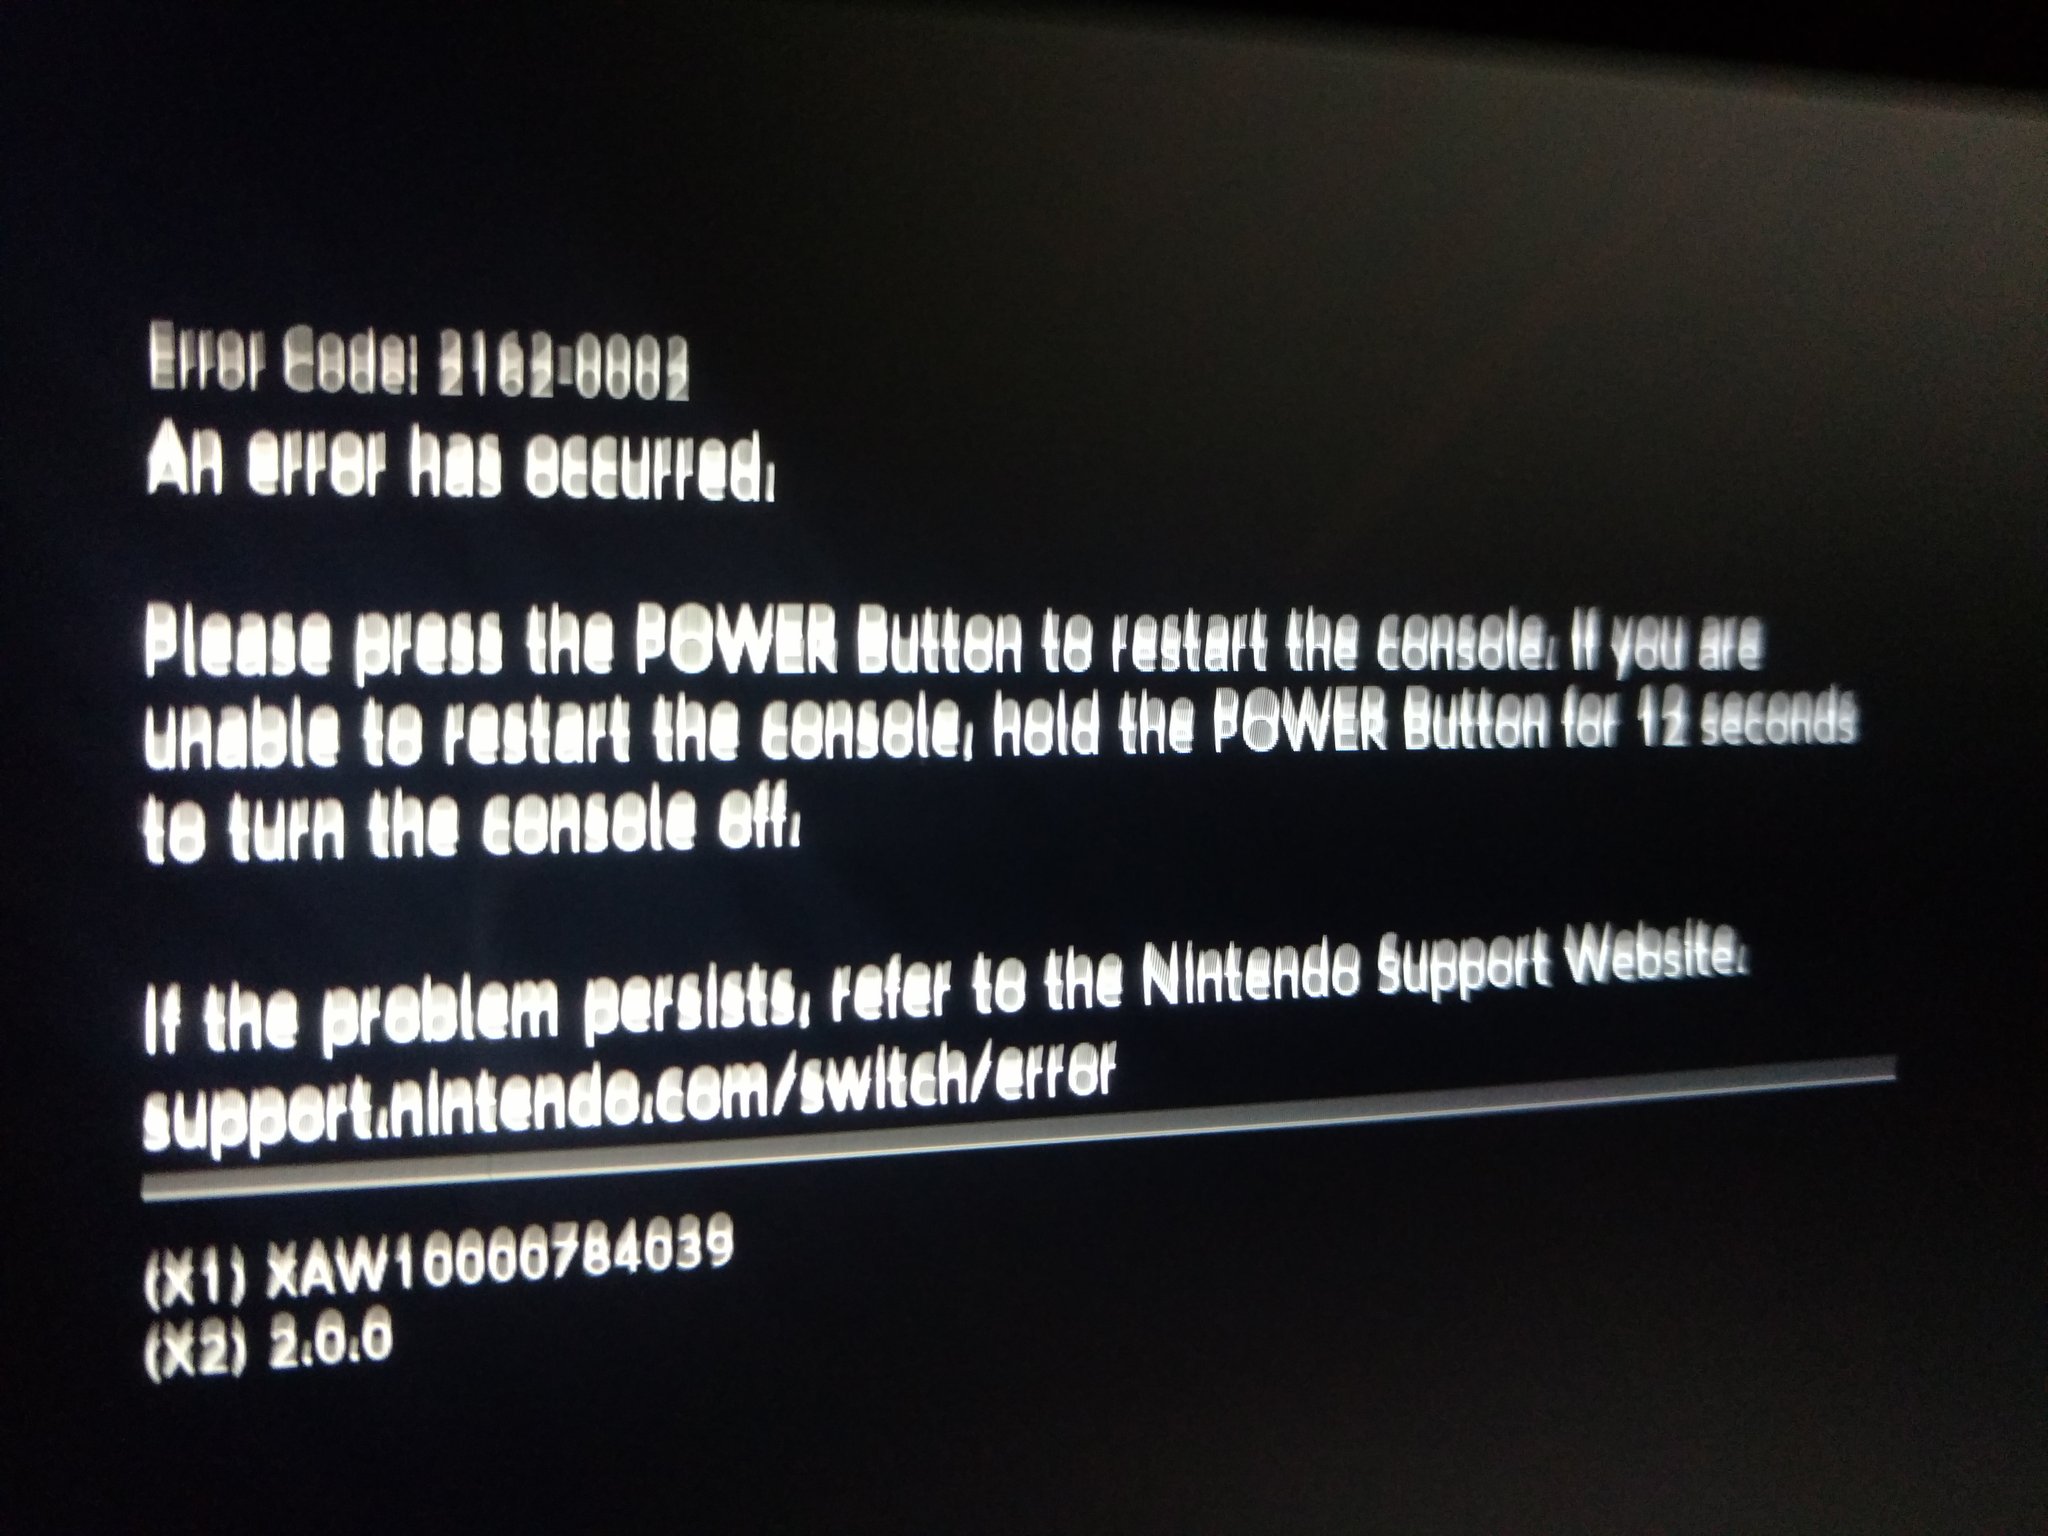 manual fuegos artificiales álbum Luxurious Chaos on Twitter: "My #NintendoSwitch just crashed. Error code  2162-0002. 1st crash since I purchased the console on launch day. No issues  starting it back up. https://t.co/ANonix77DT" / Twitter